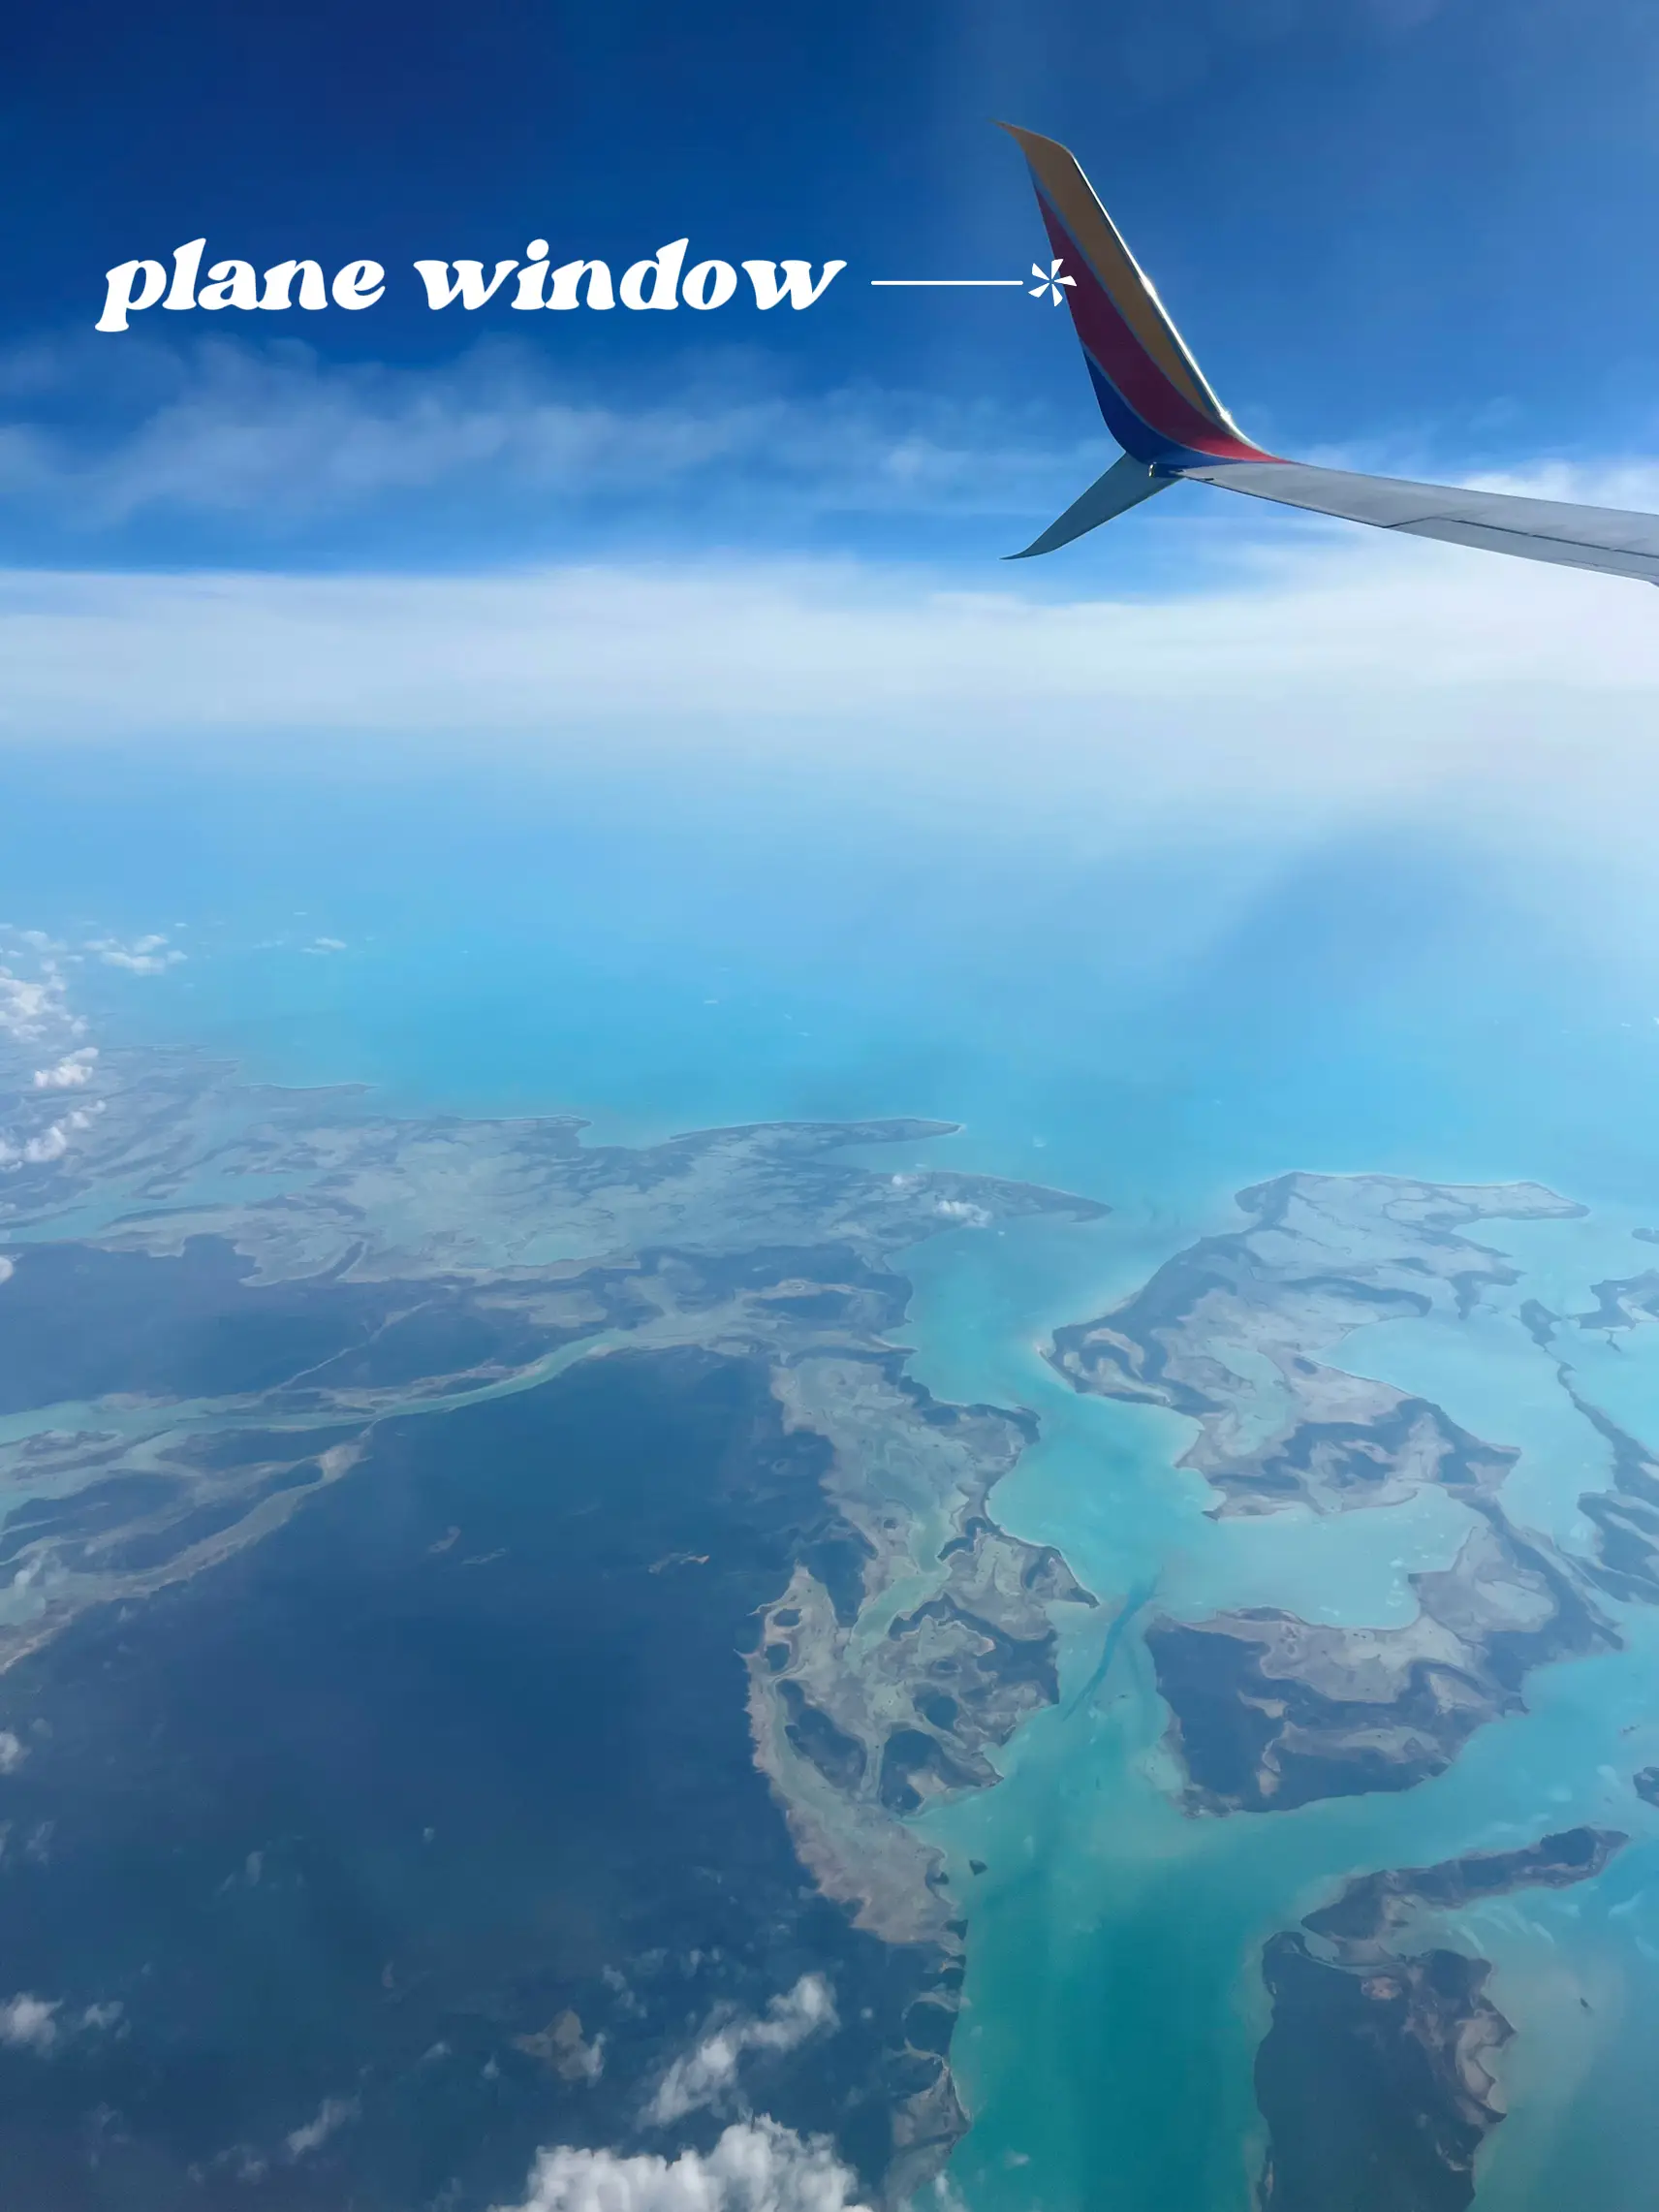  An airplane is flying in the air with a plane window.